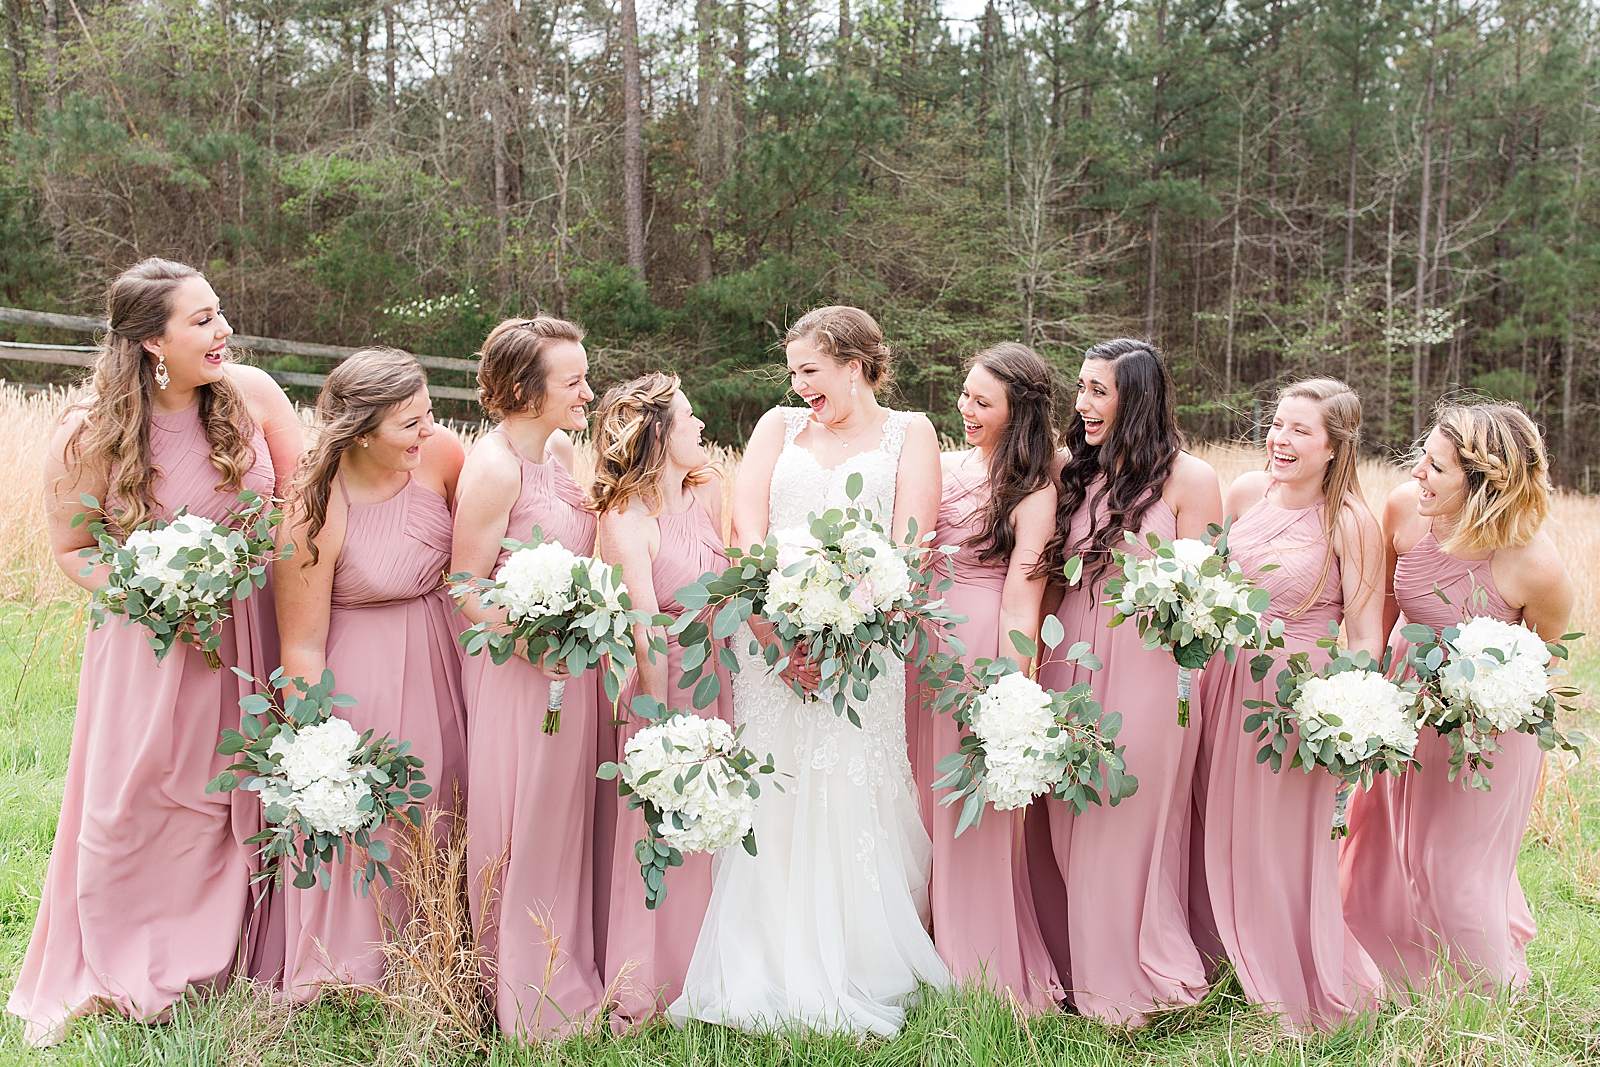 Macedonia Hills Wedding Bride with Bridesmaids in Dusty Rose and White Hydrangea Flowers Laughing in Field Photo